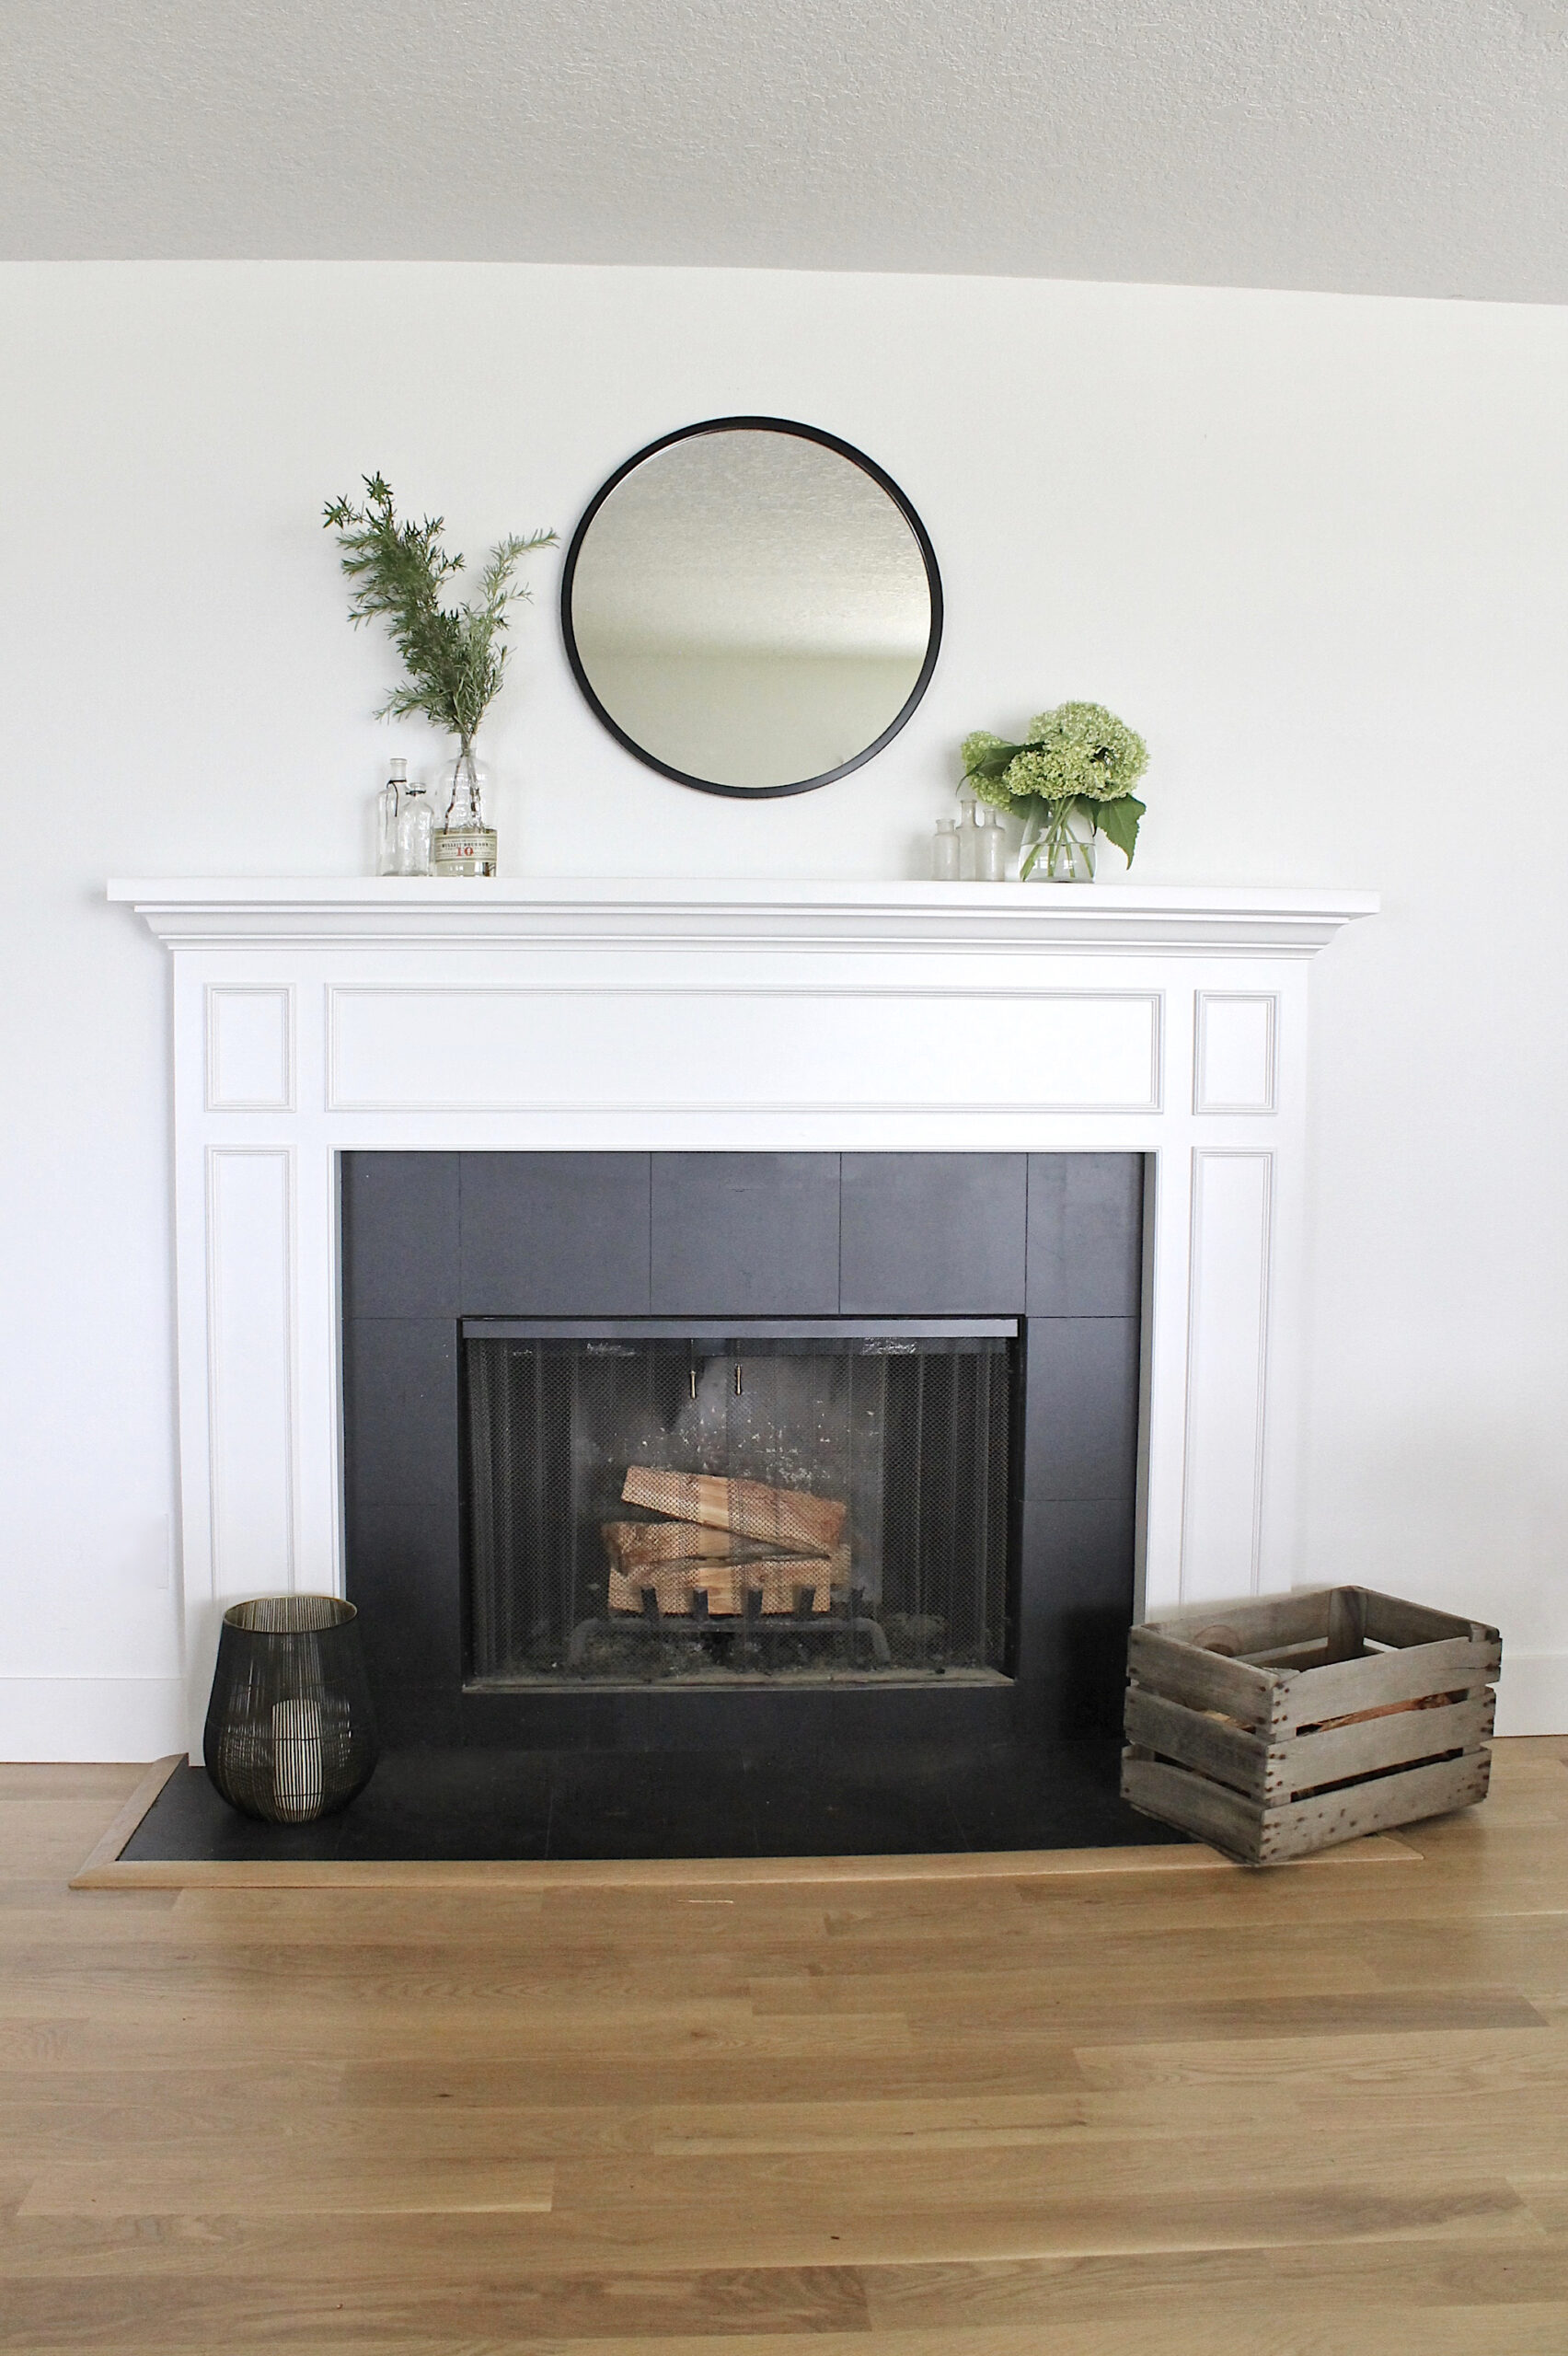 How To Paint A Ceramic Tile Fireplace, How To Replace Tile On A Fireplace